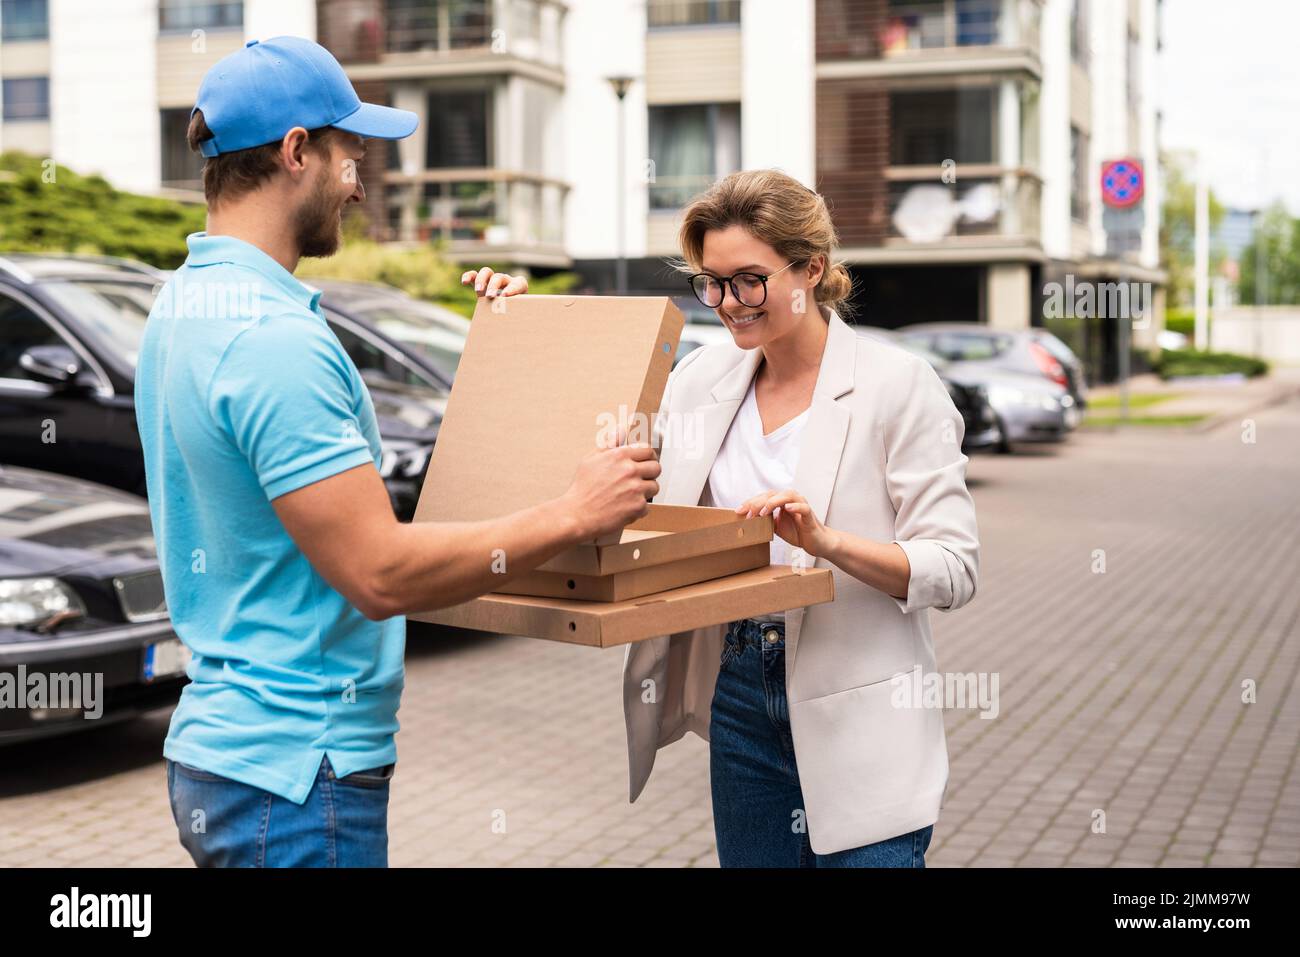 Delivery man wearing blue uniform delivers pizza to a woman client Stock Photo